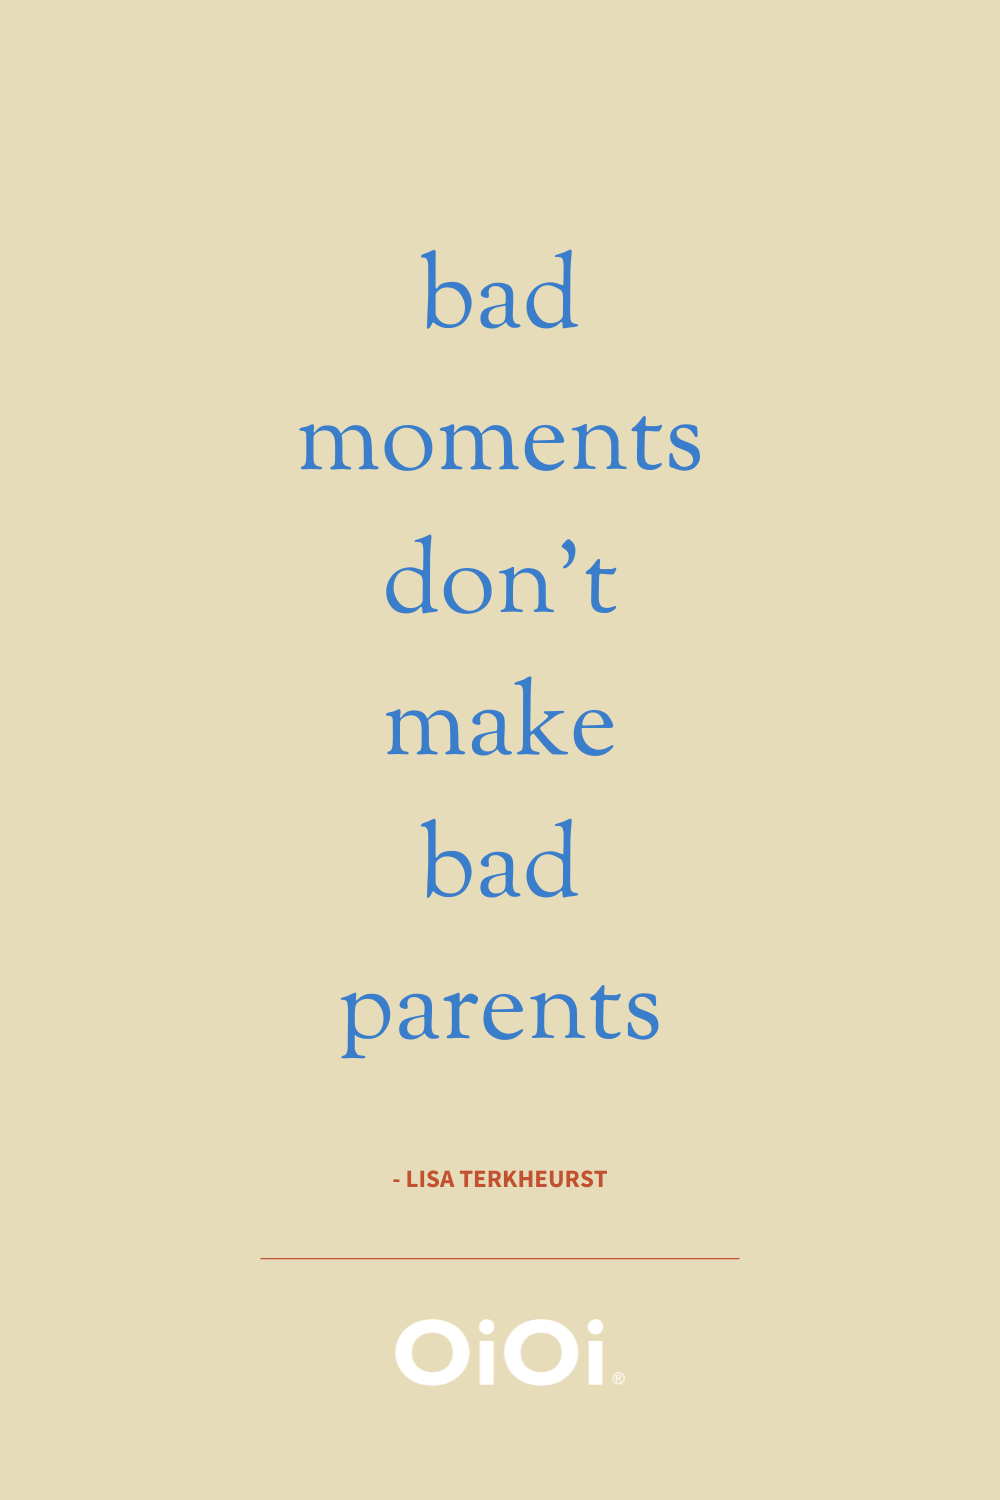 quotes about bad fathers